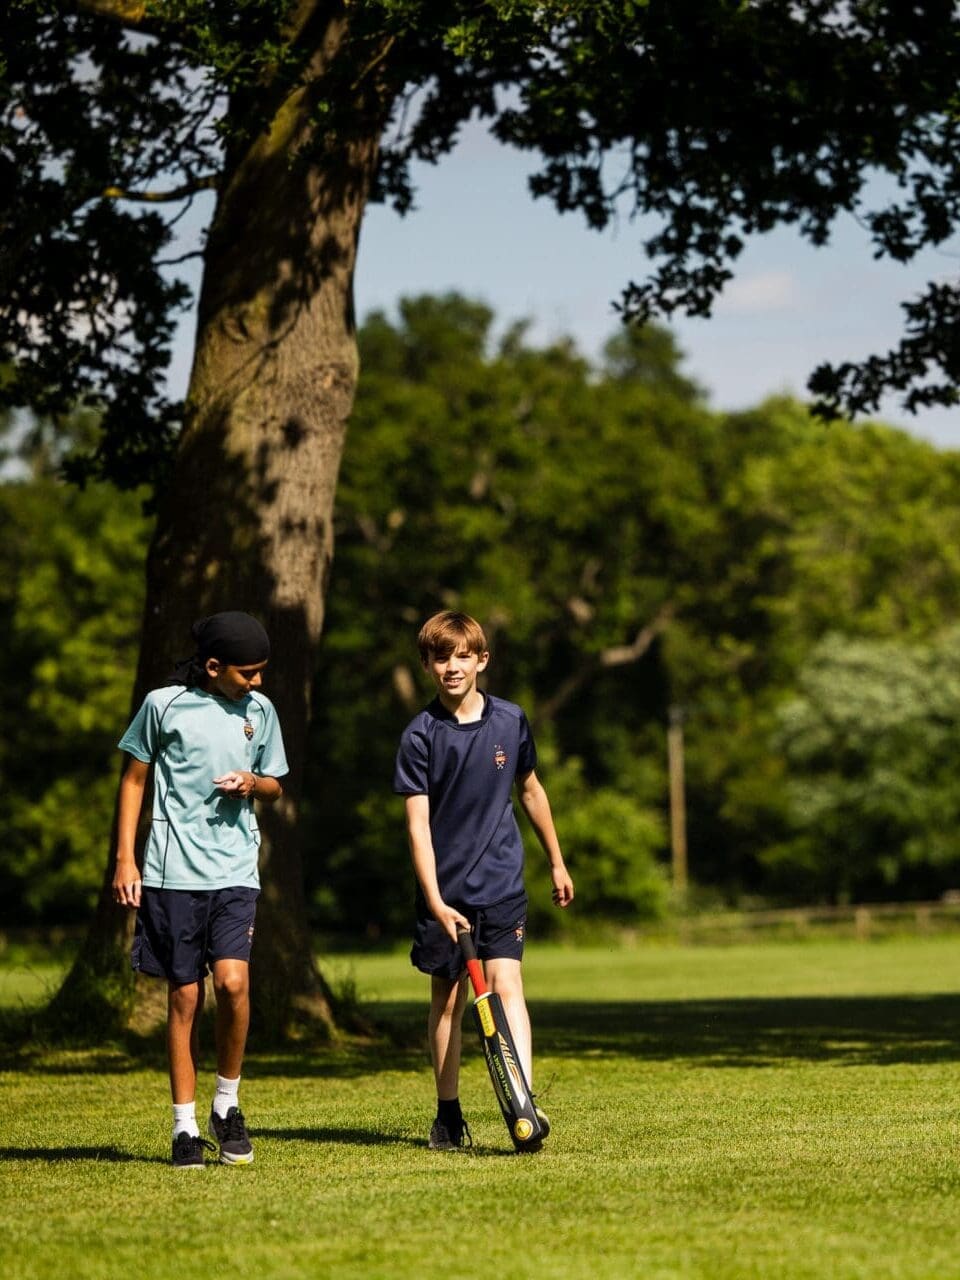 Image of 2 male students walking through the playing fields with a cricket bat